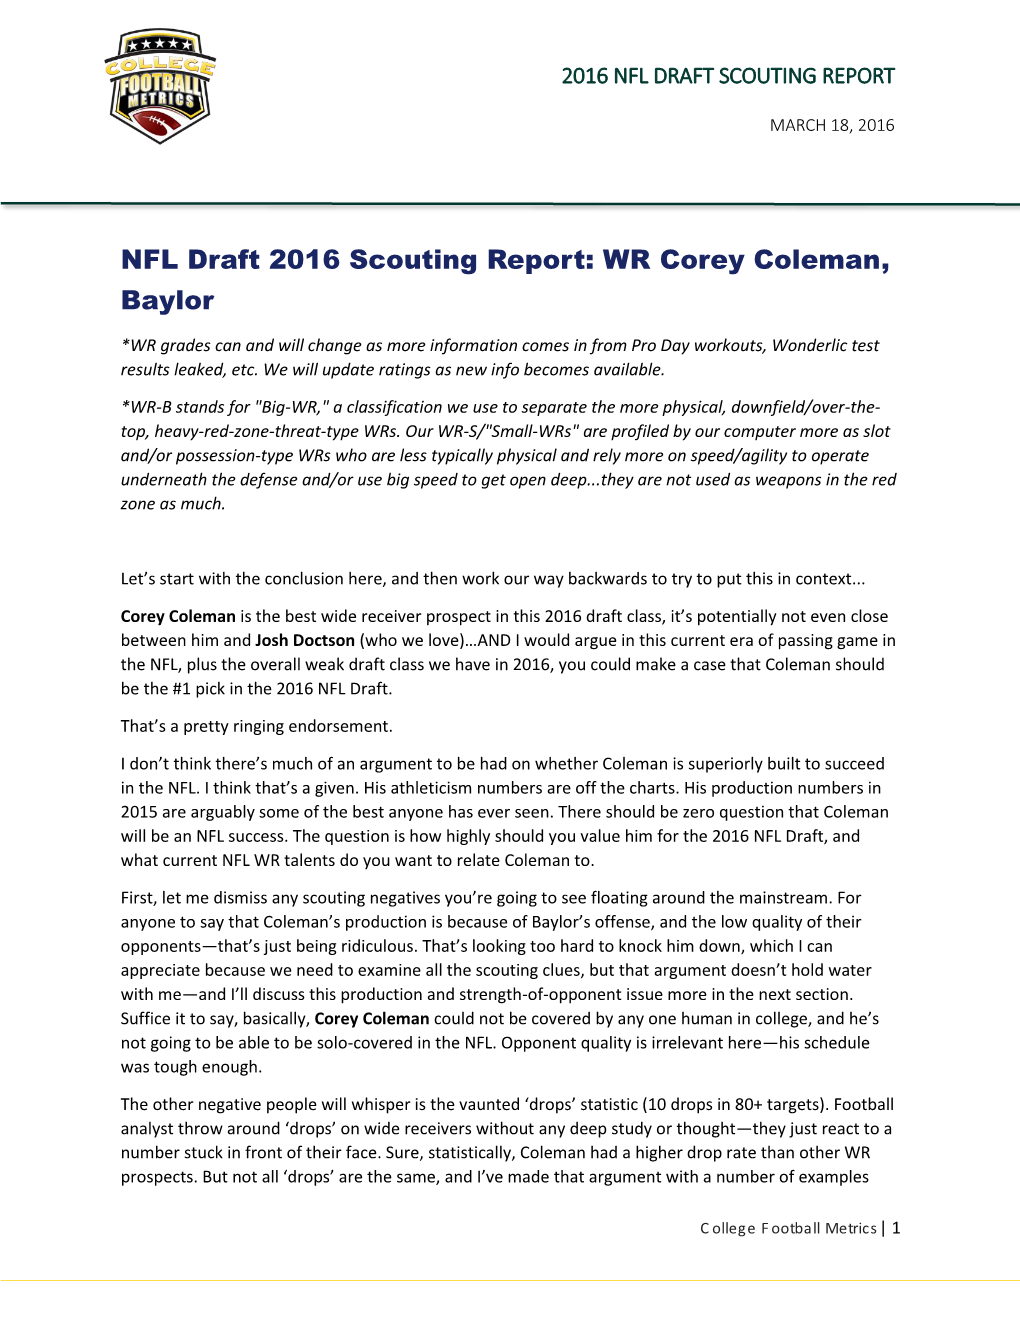 NFL Draft 2016 Scouting Report: WR Corey Coleman, Baylor